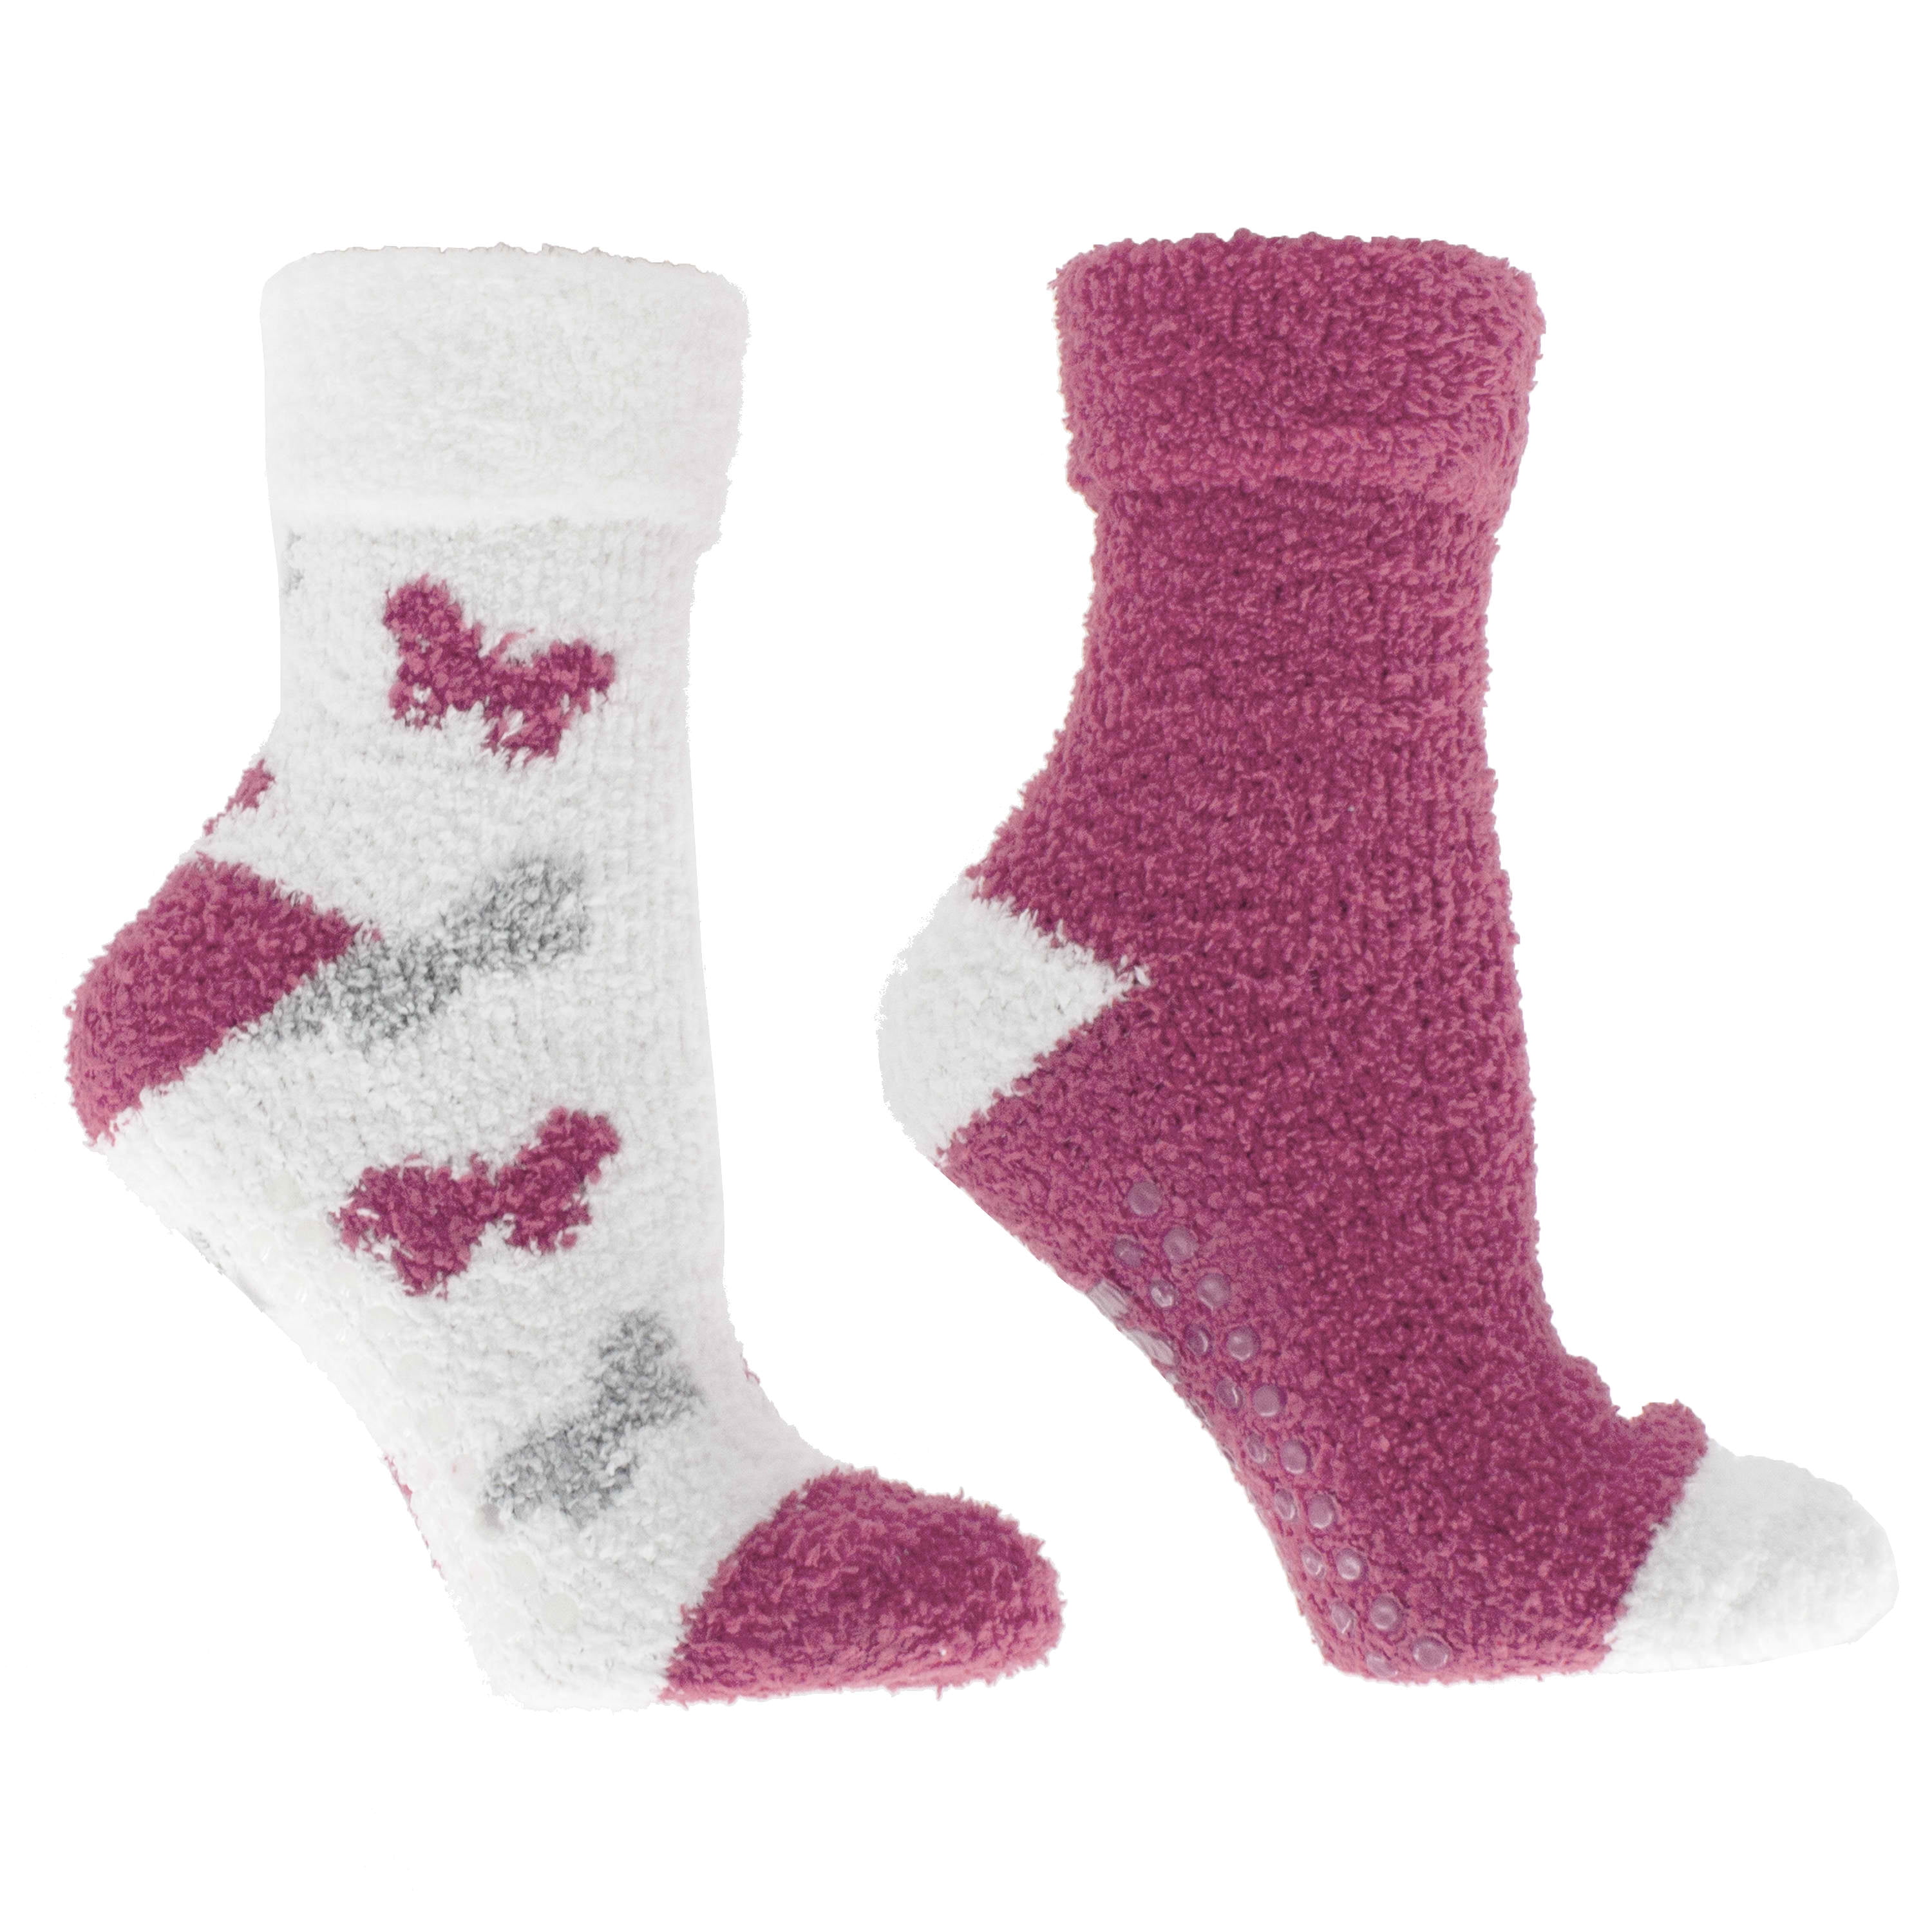 2 Pair Fuzzy Socks W/Non Skid, Rose & Shea Butter Infused, Coral ...